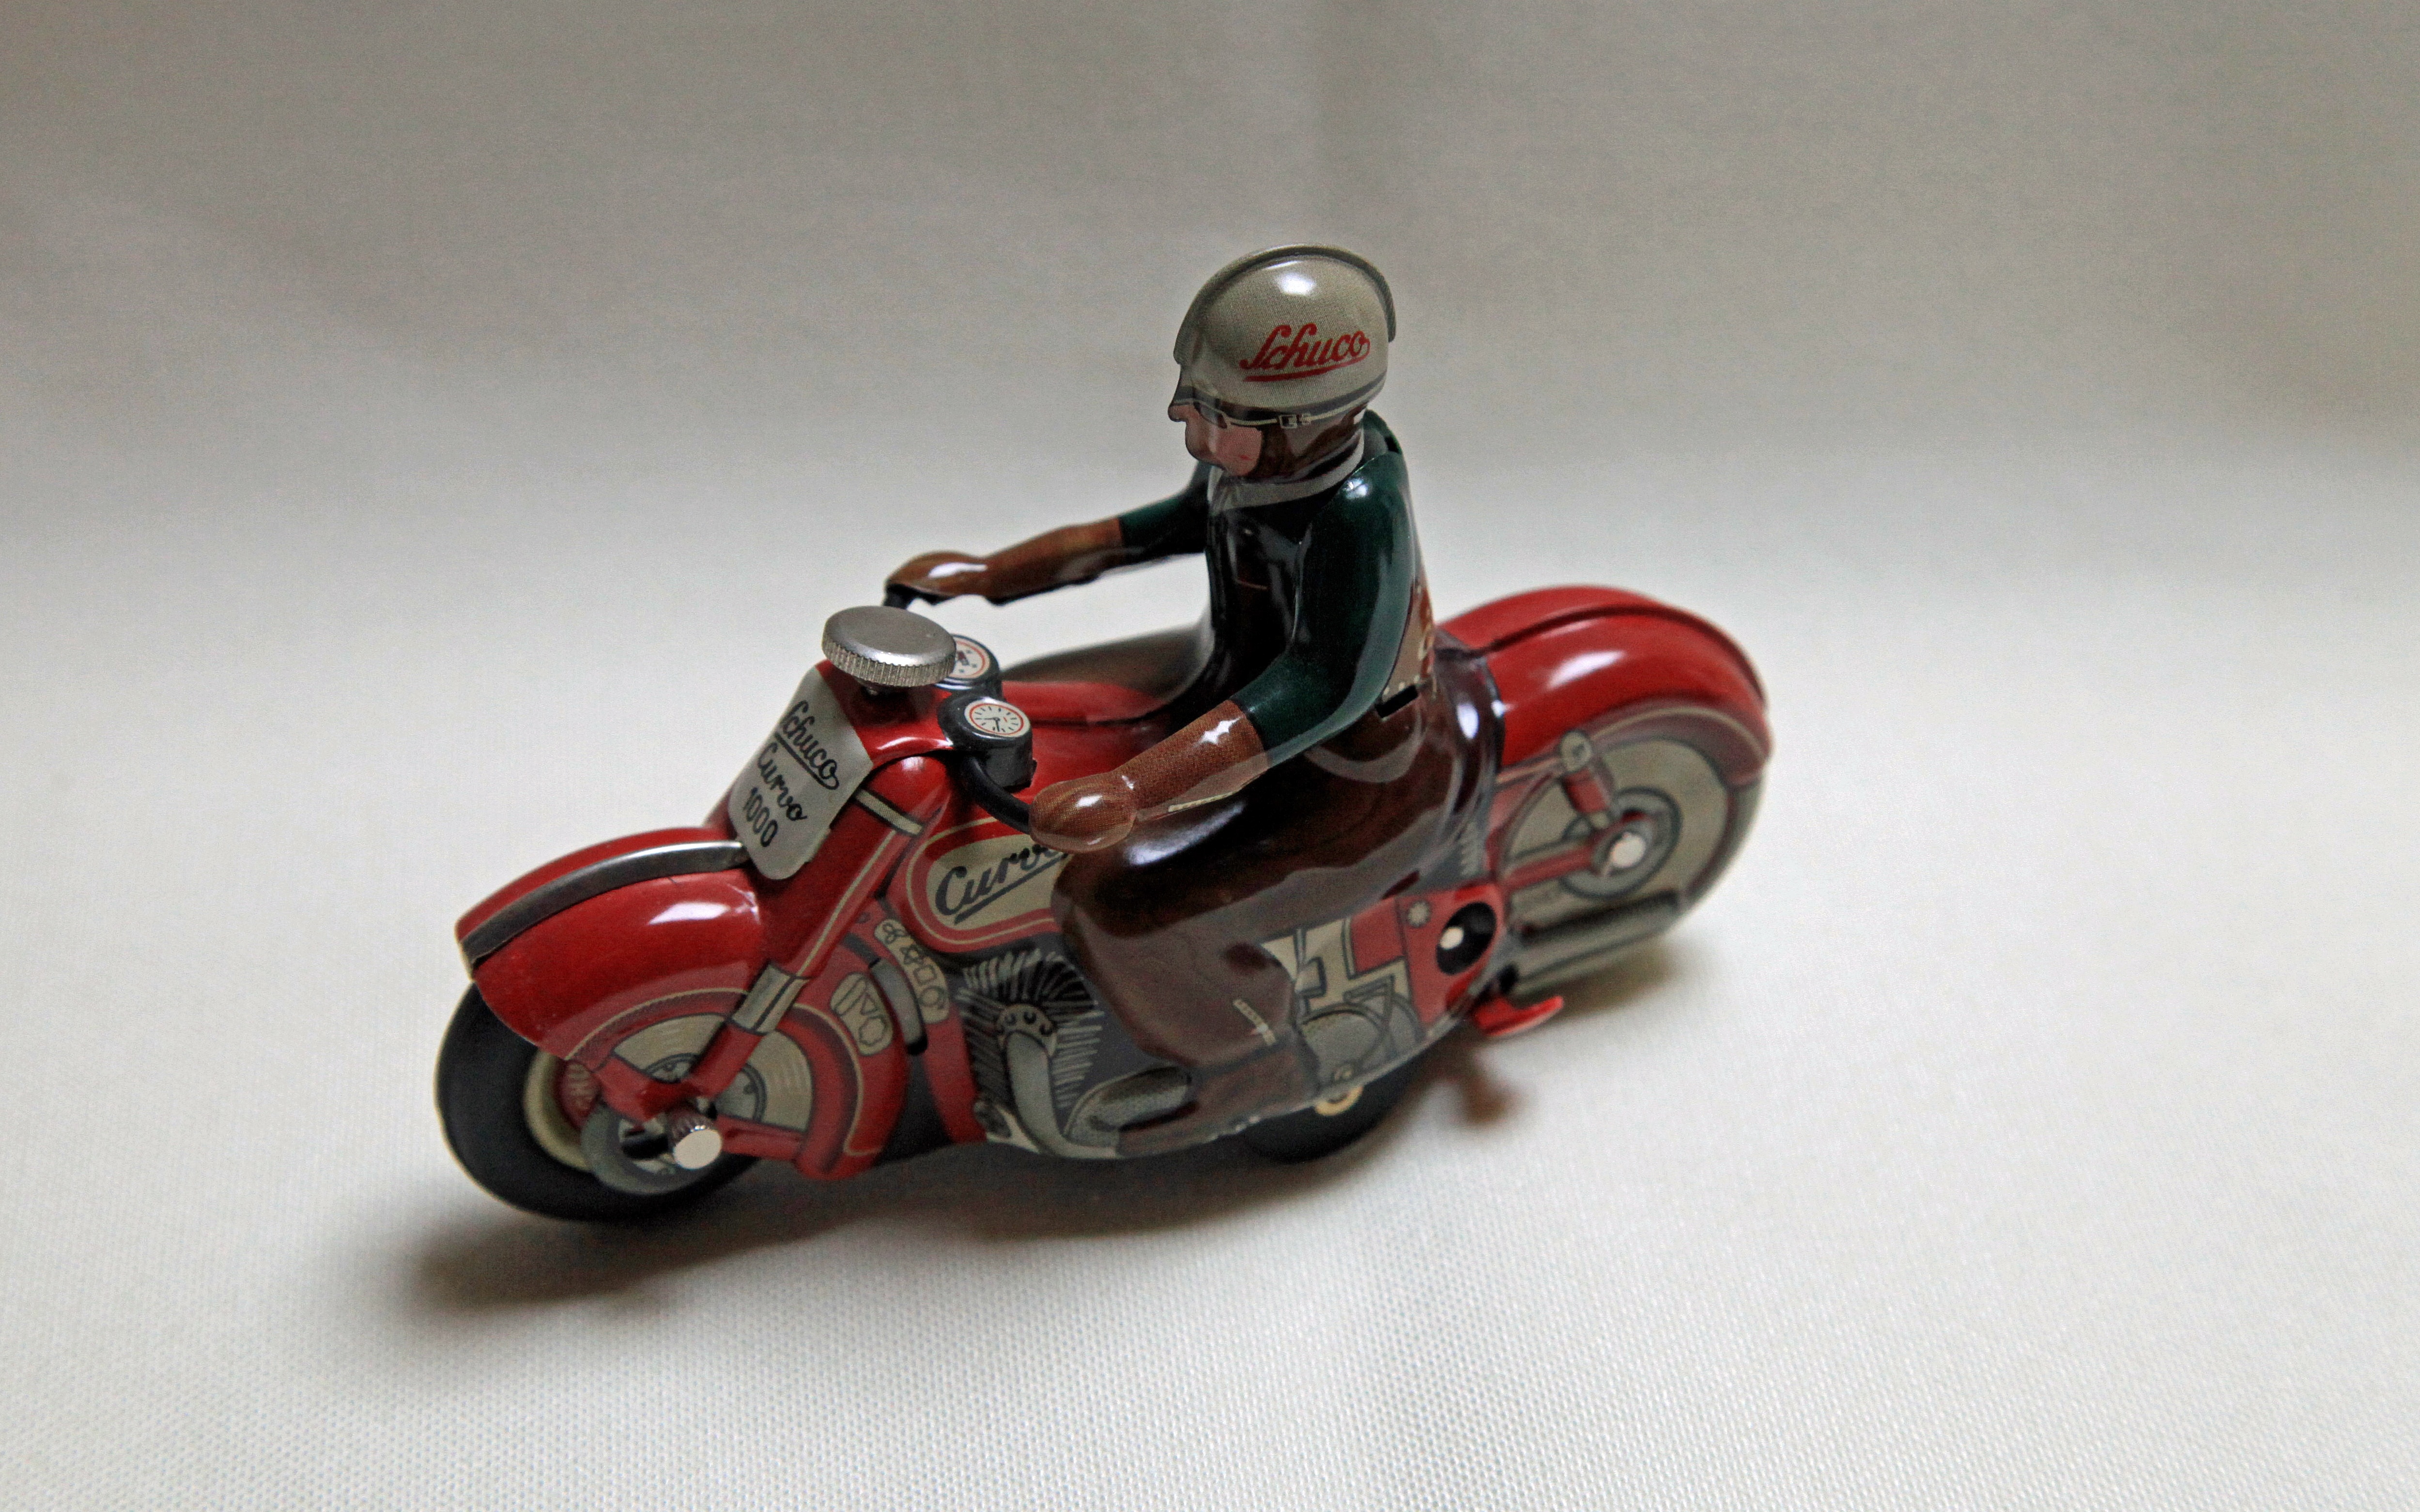 red and white man riding sports bike figurine